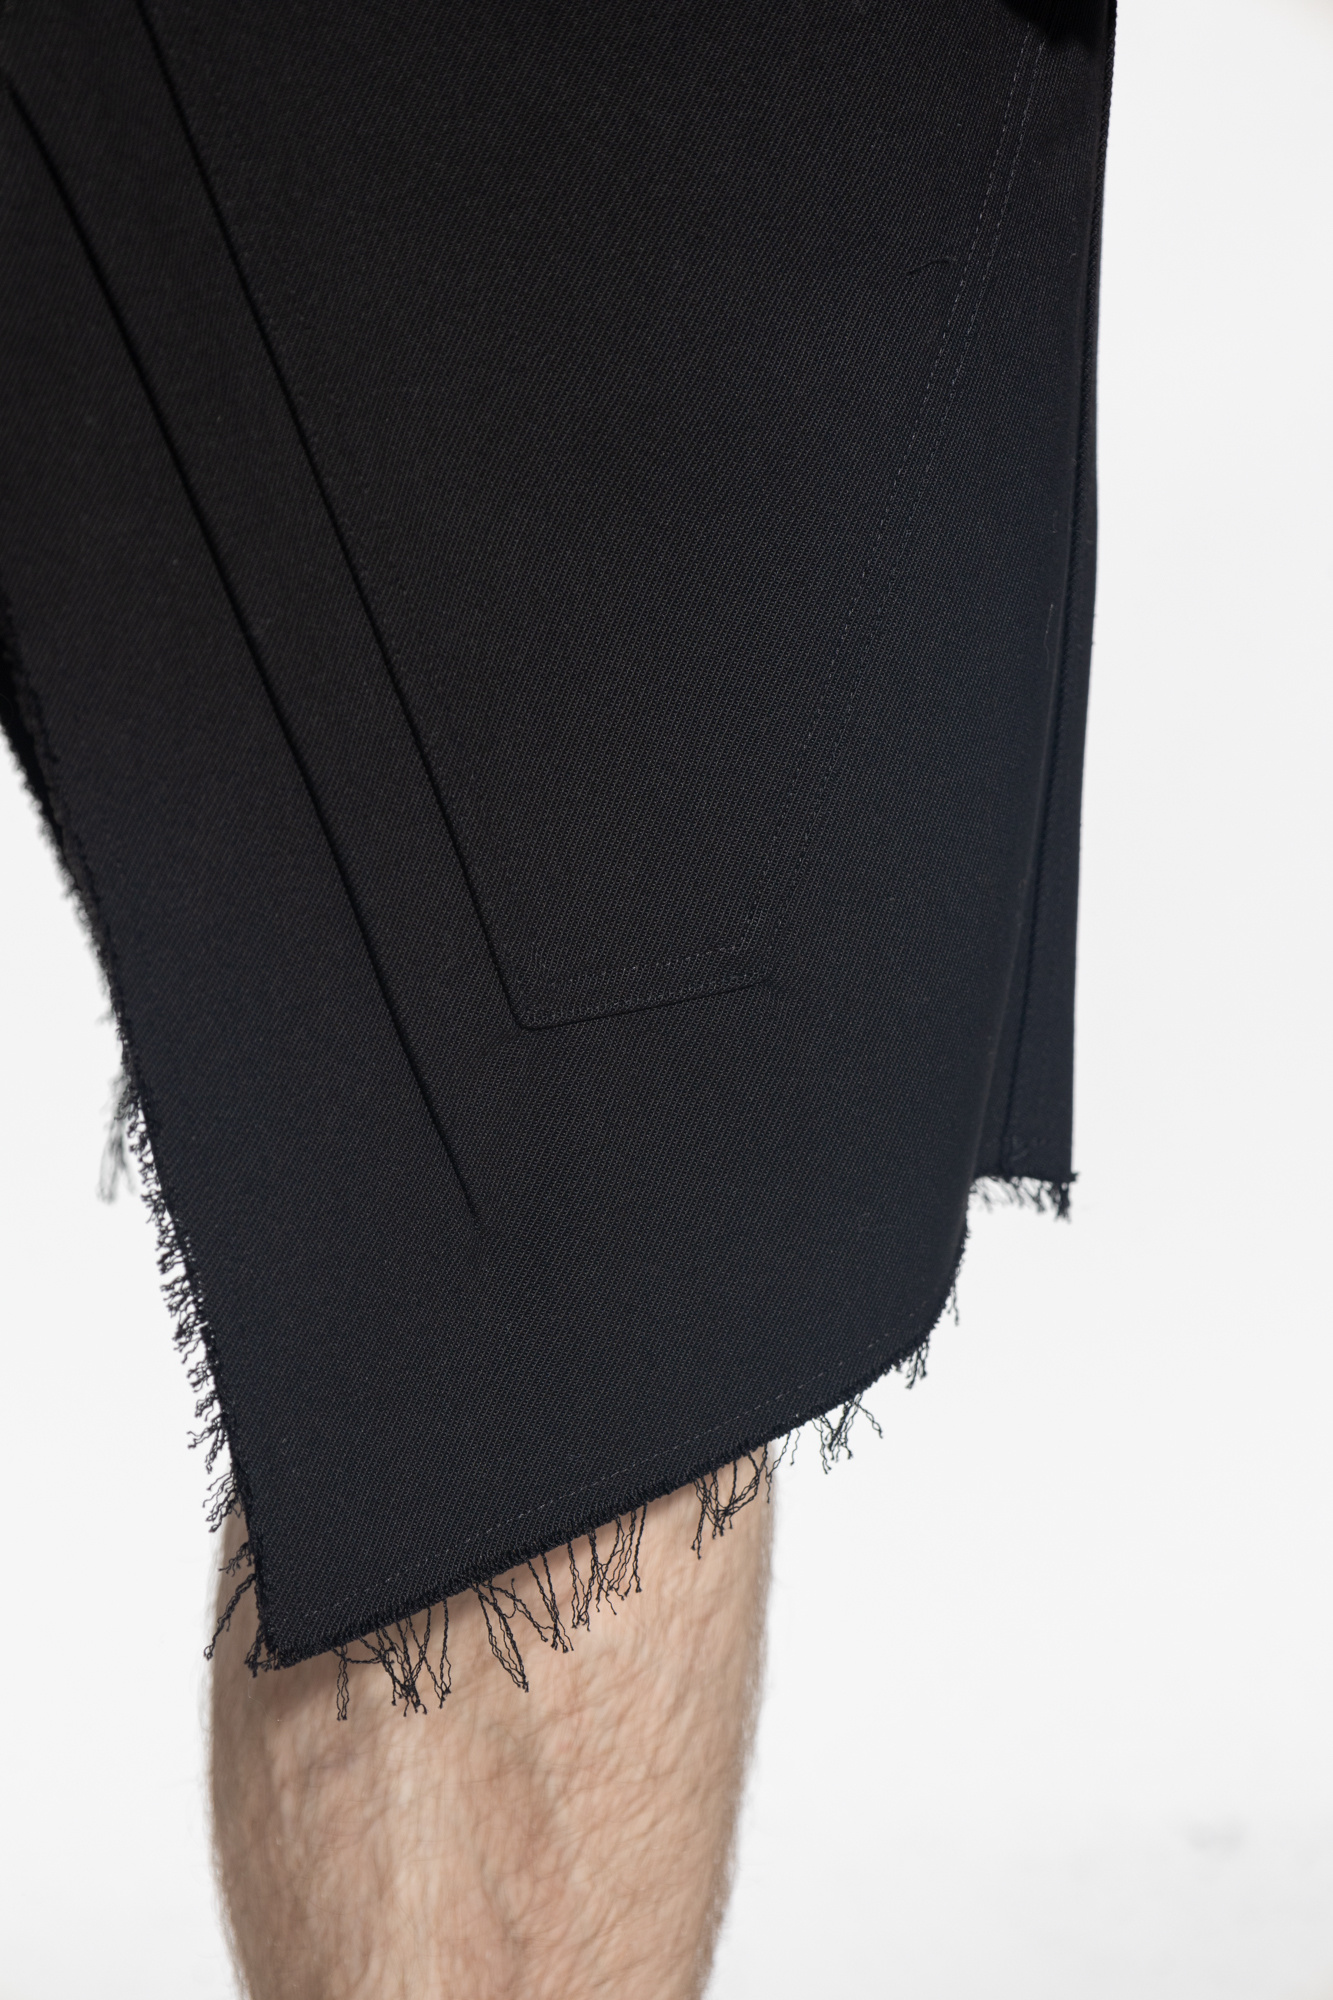 Rick Owens ‘Silvered’ skirt with slit